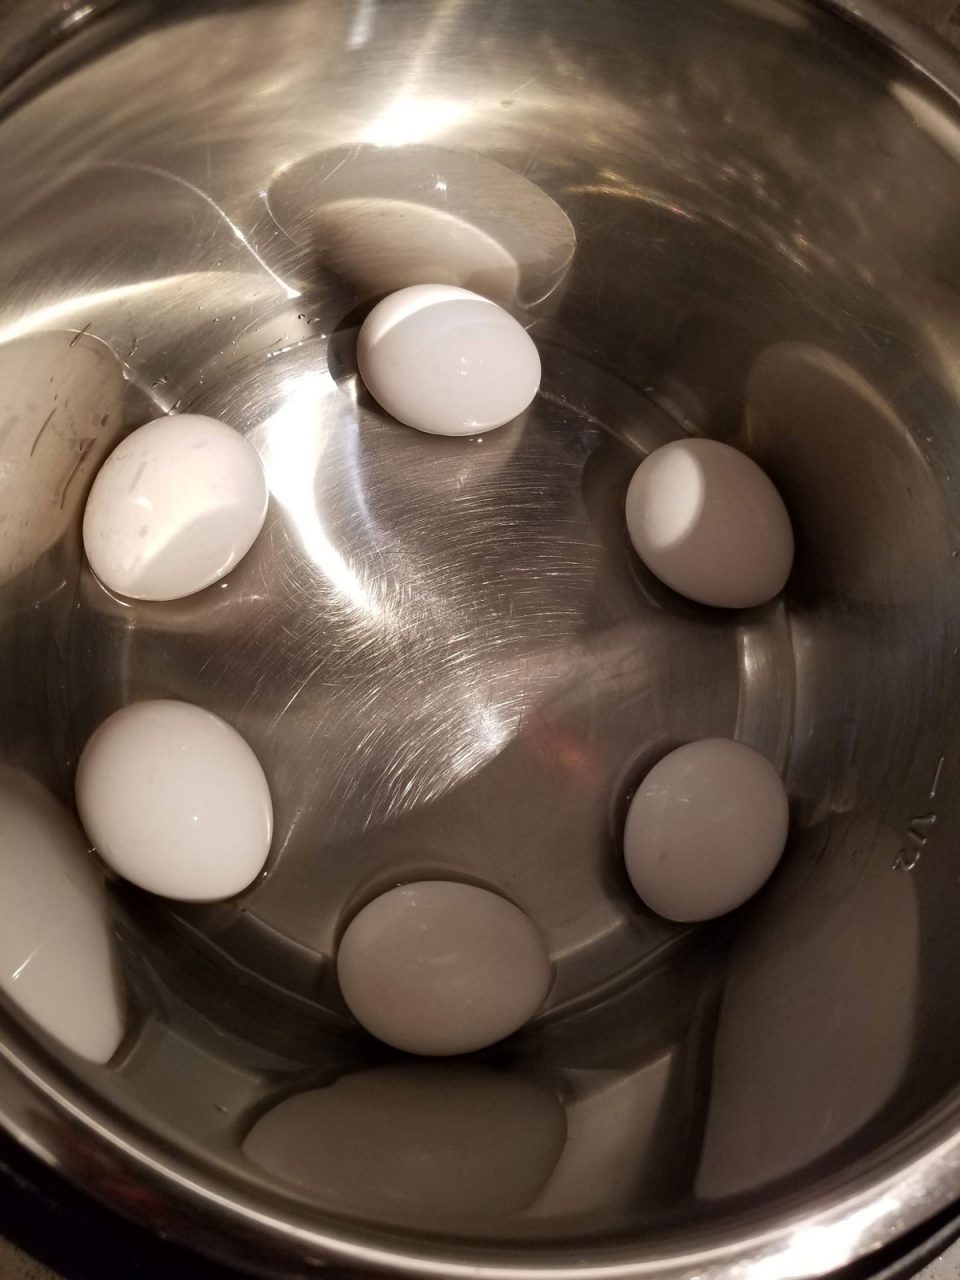 placing eggs inside the instant pot